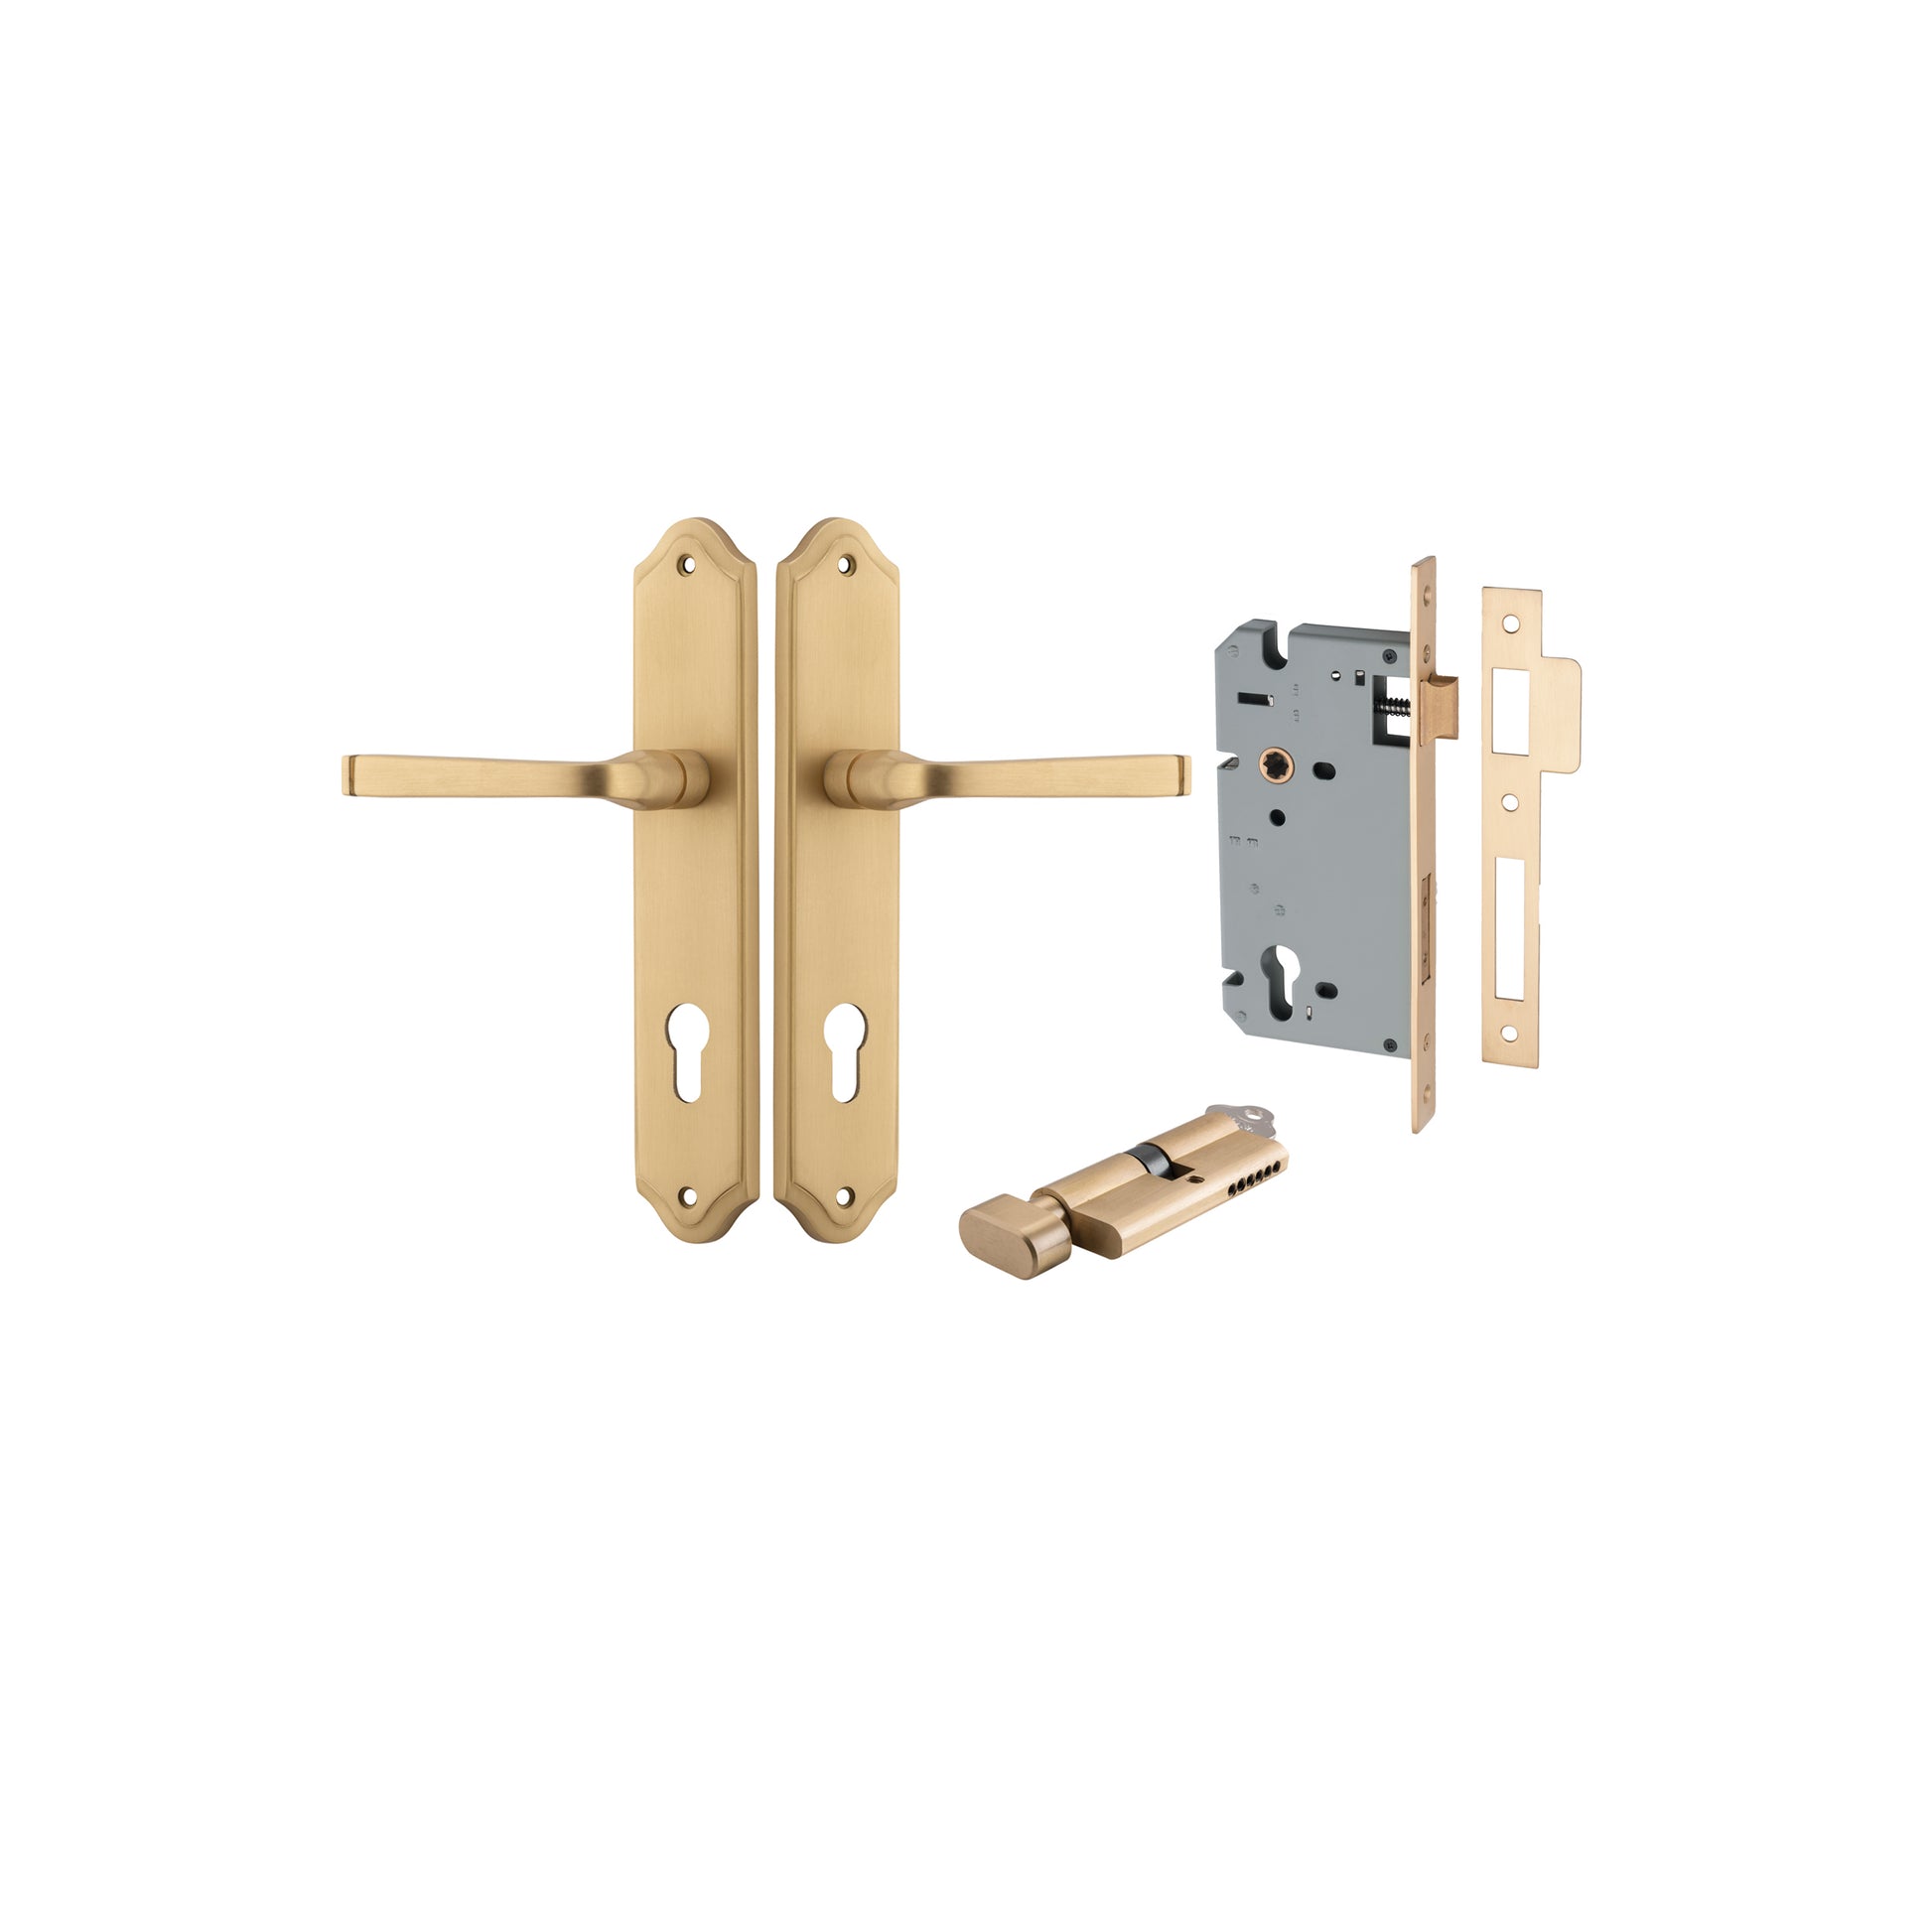 Door Lever Annecy Shouldered Euro Brushed Brass CTC85mm H240xW50xP65mm Entrance Kit, Mortice Lock Euro Brushed Brass CTC85mm Backset 60mm, Euro Cylinder Key Thumb 6 Pin Brushed Brass L70mm   KA1 in Brushed Brass